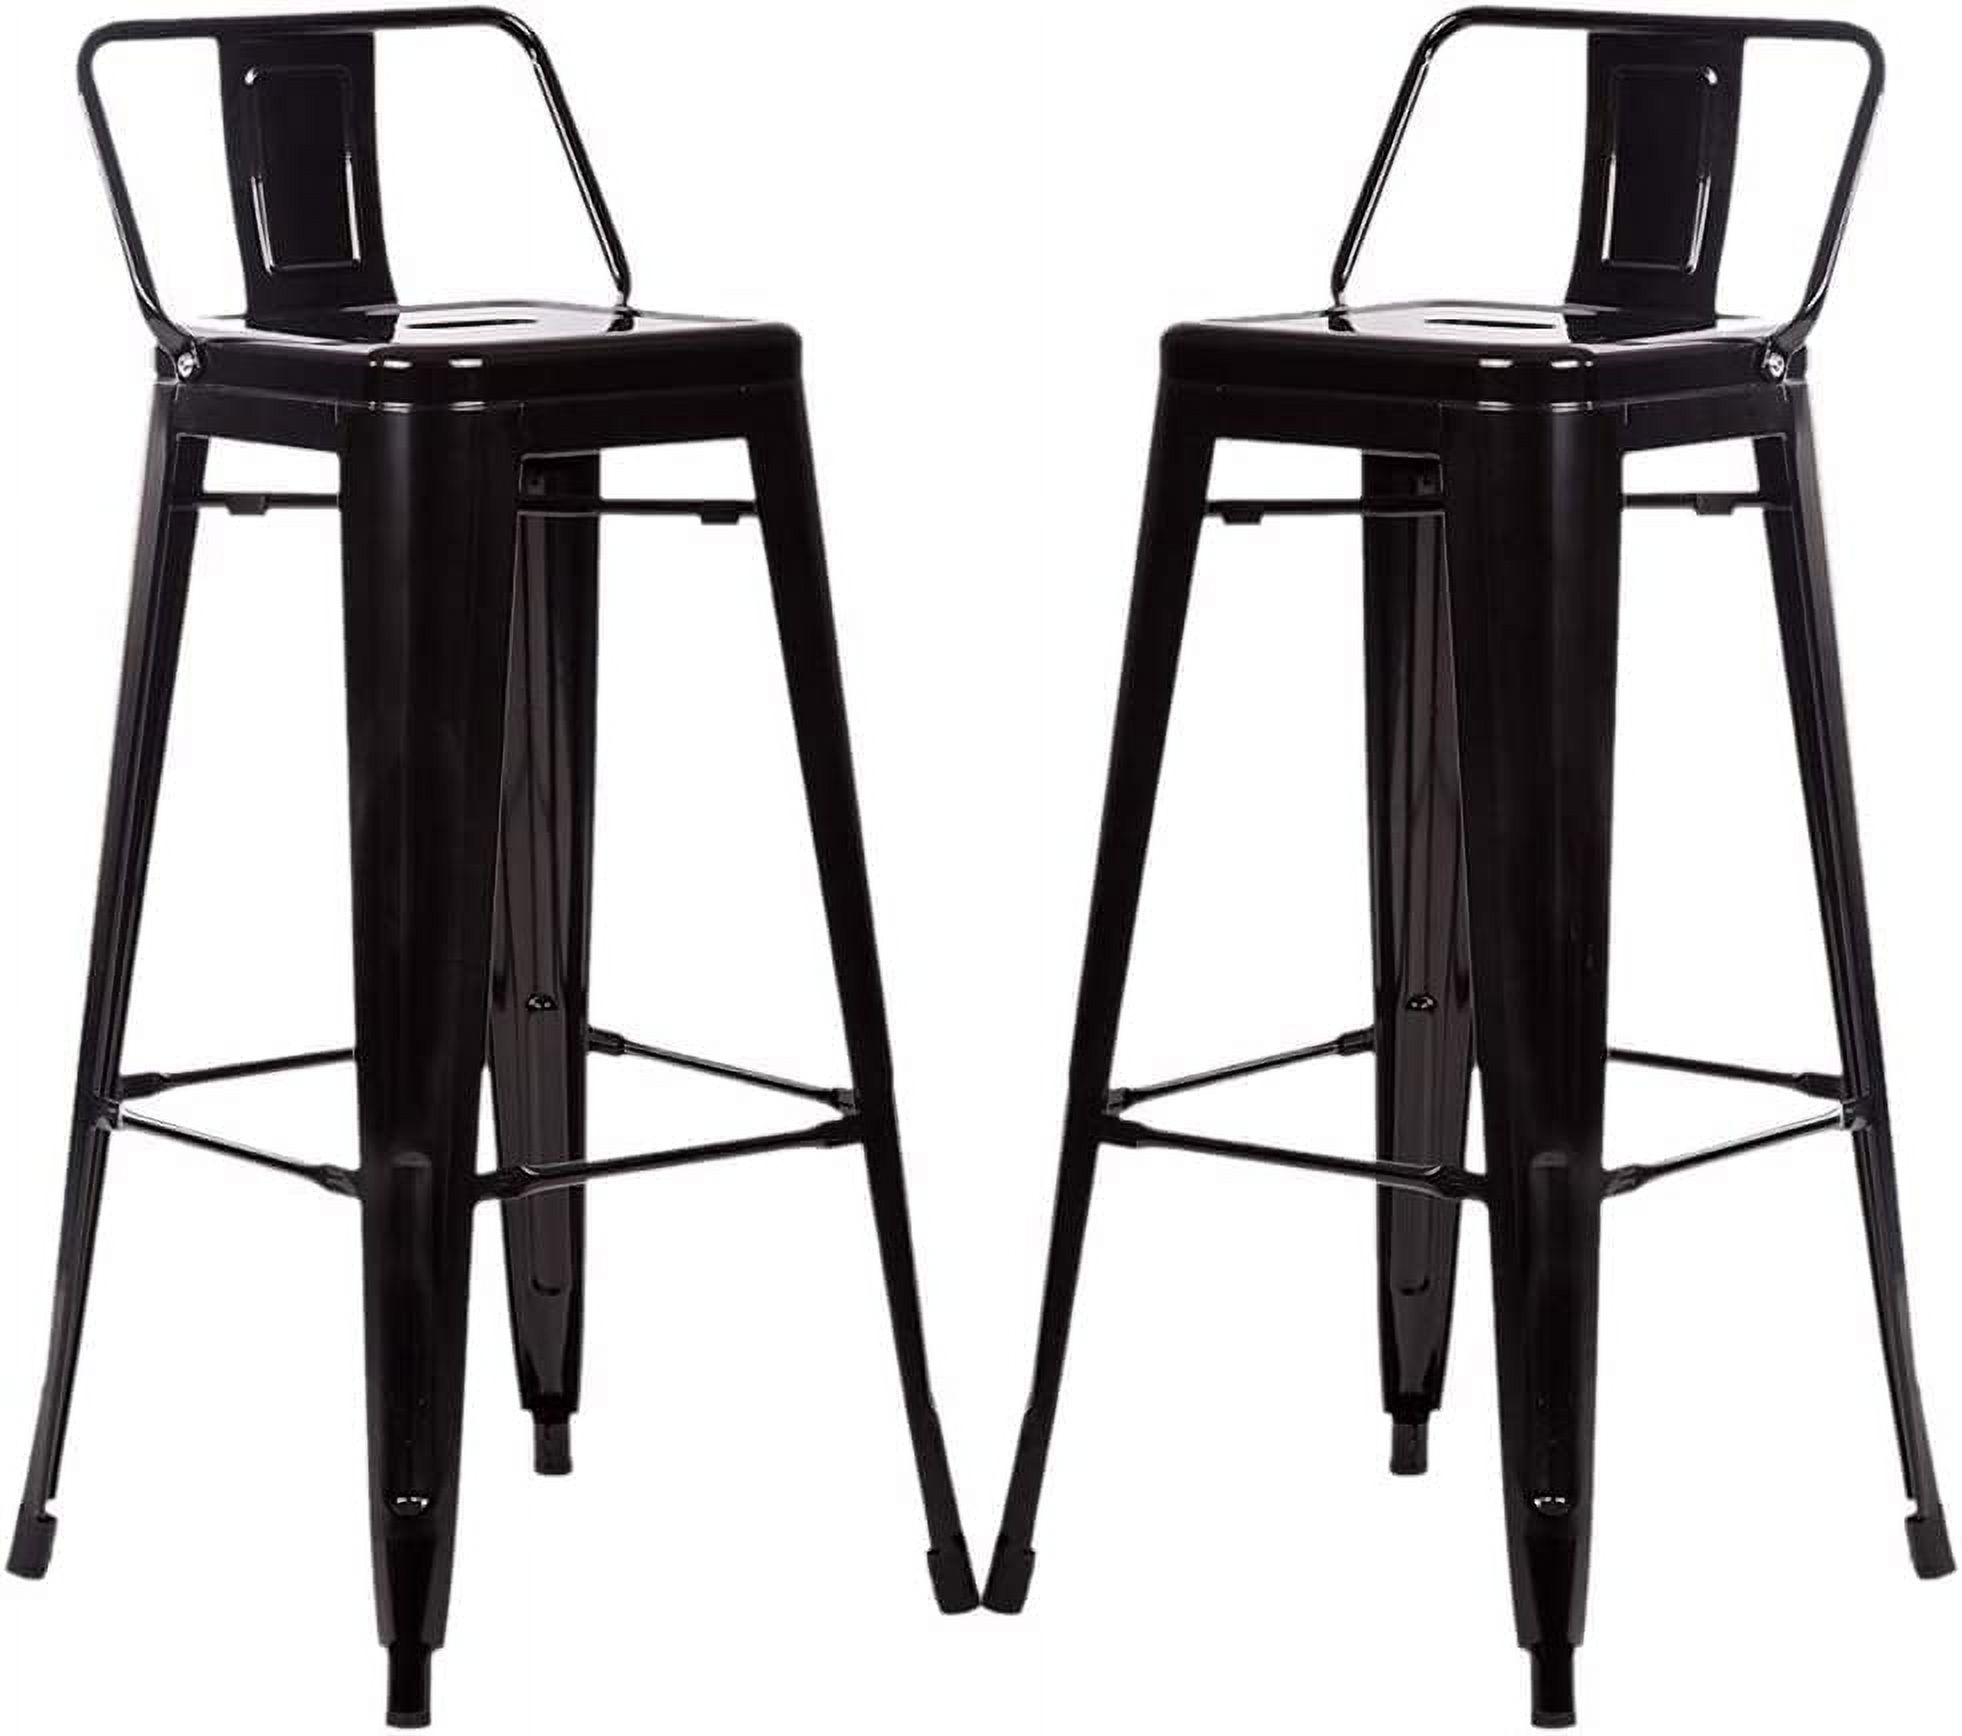 Dkelincs Metal Bar Stools Set of 2 Industrial Counter Height Barstools Bistro Trattoria Metal Chairs with Back 30 inch Tolix-Style Modern Bar Chairs Stackable for Patio, Cafe, Farmhouse, Black - image 1 of 7